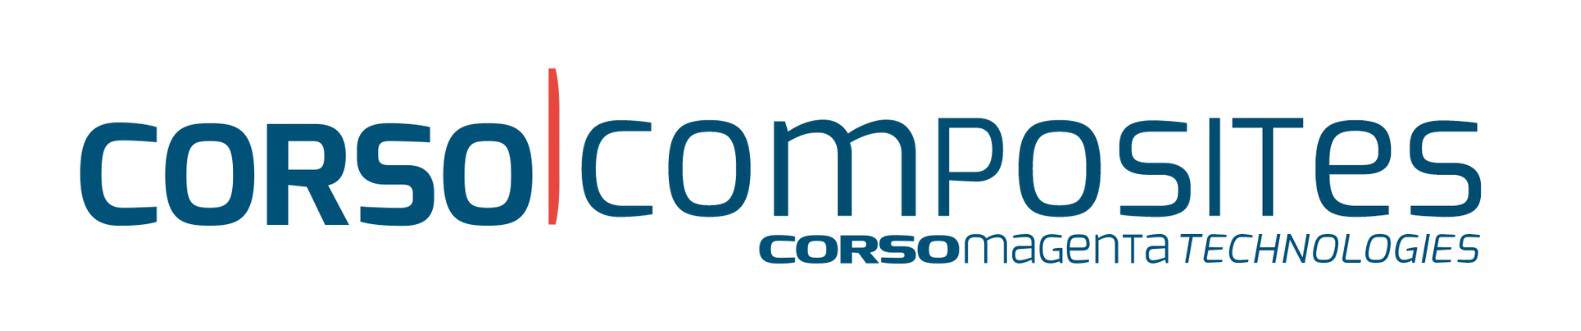 Corso Composites - Composite finishes paint film systems for the composite industry